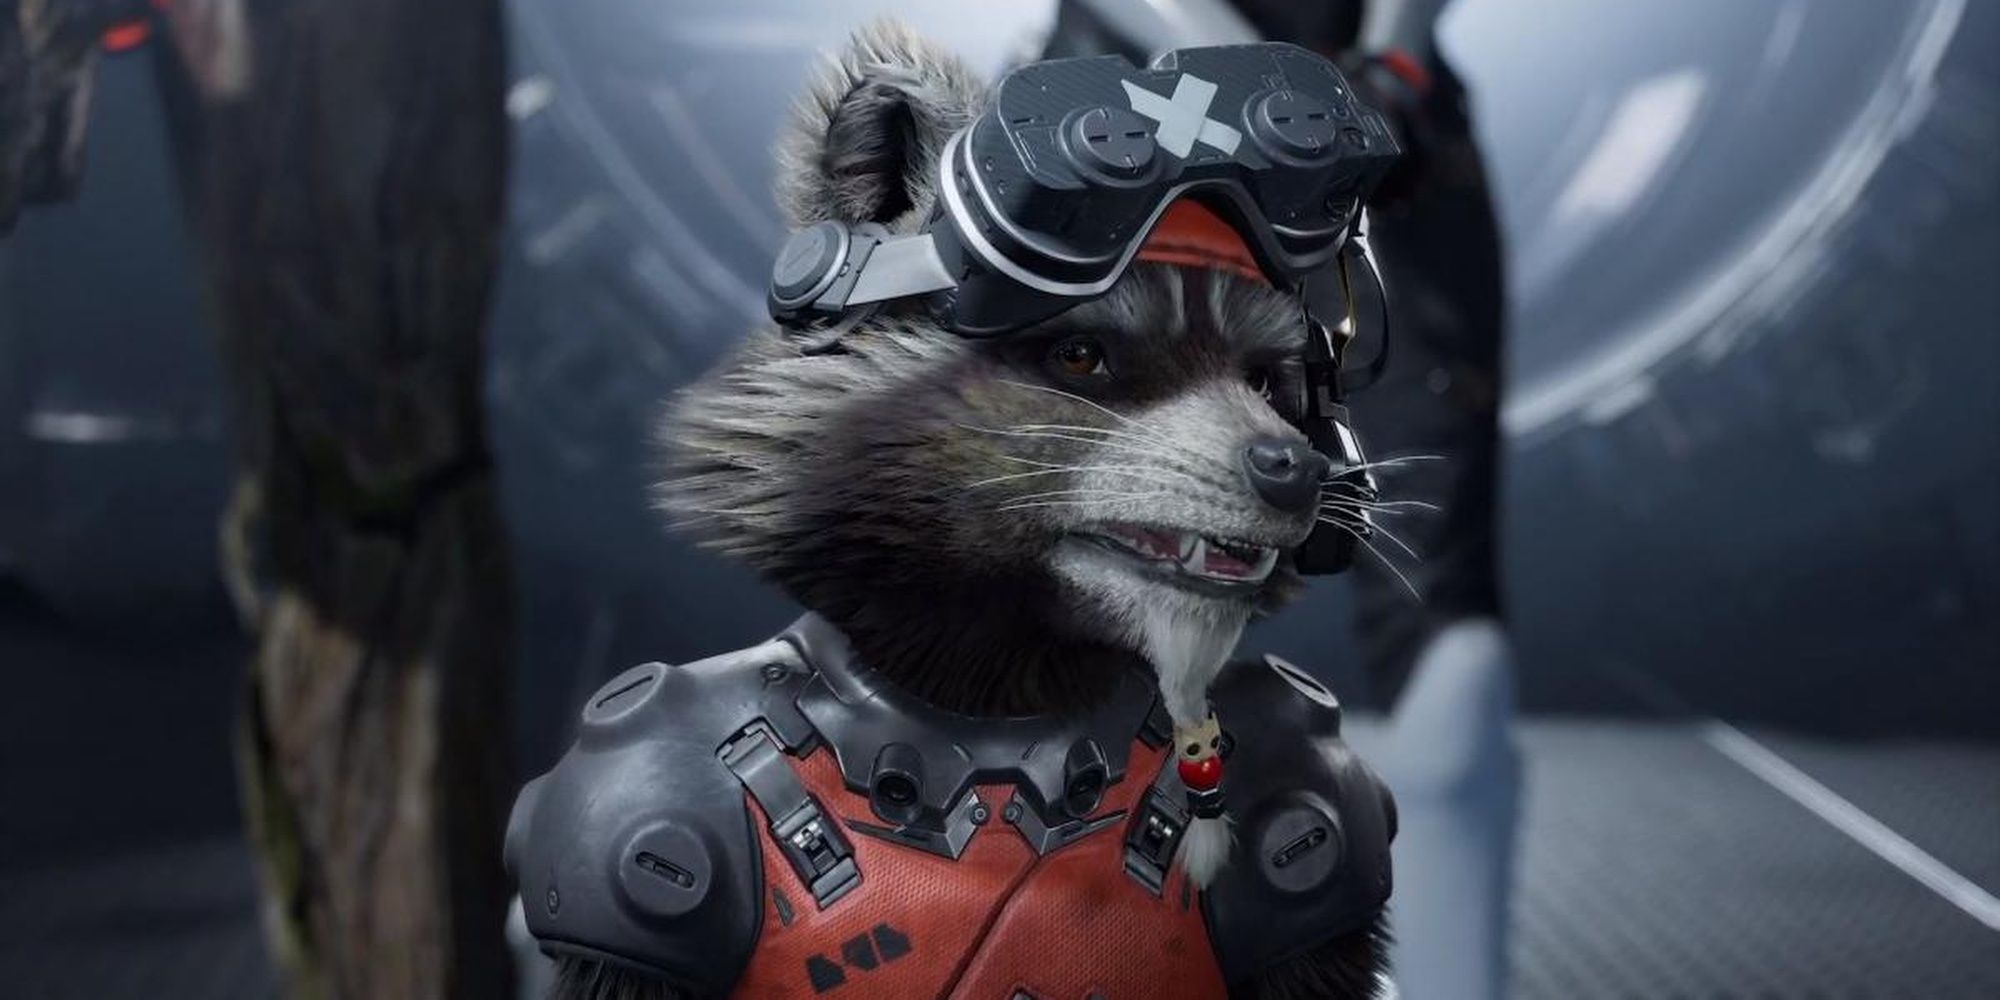 Rocket Racoon featured in Marvel's Guardians of the Galaxy